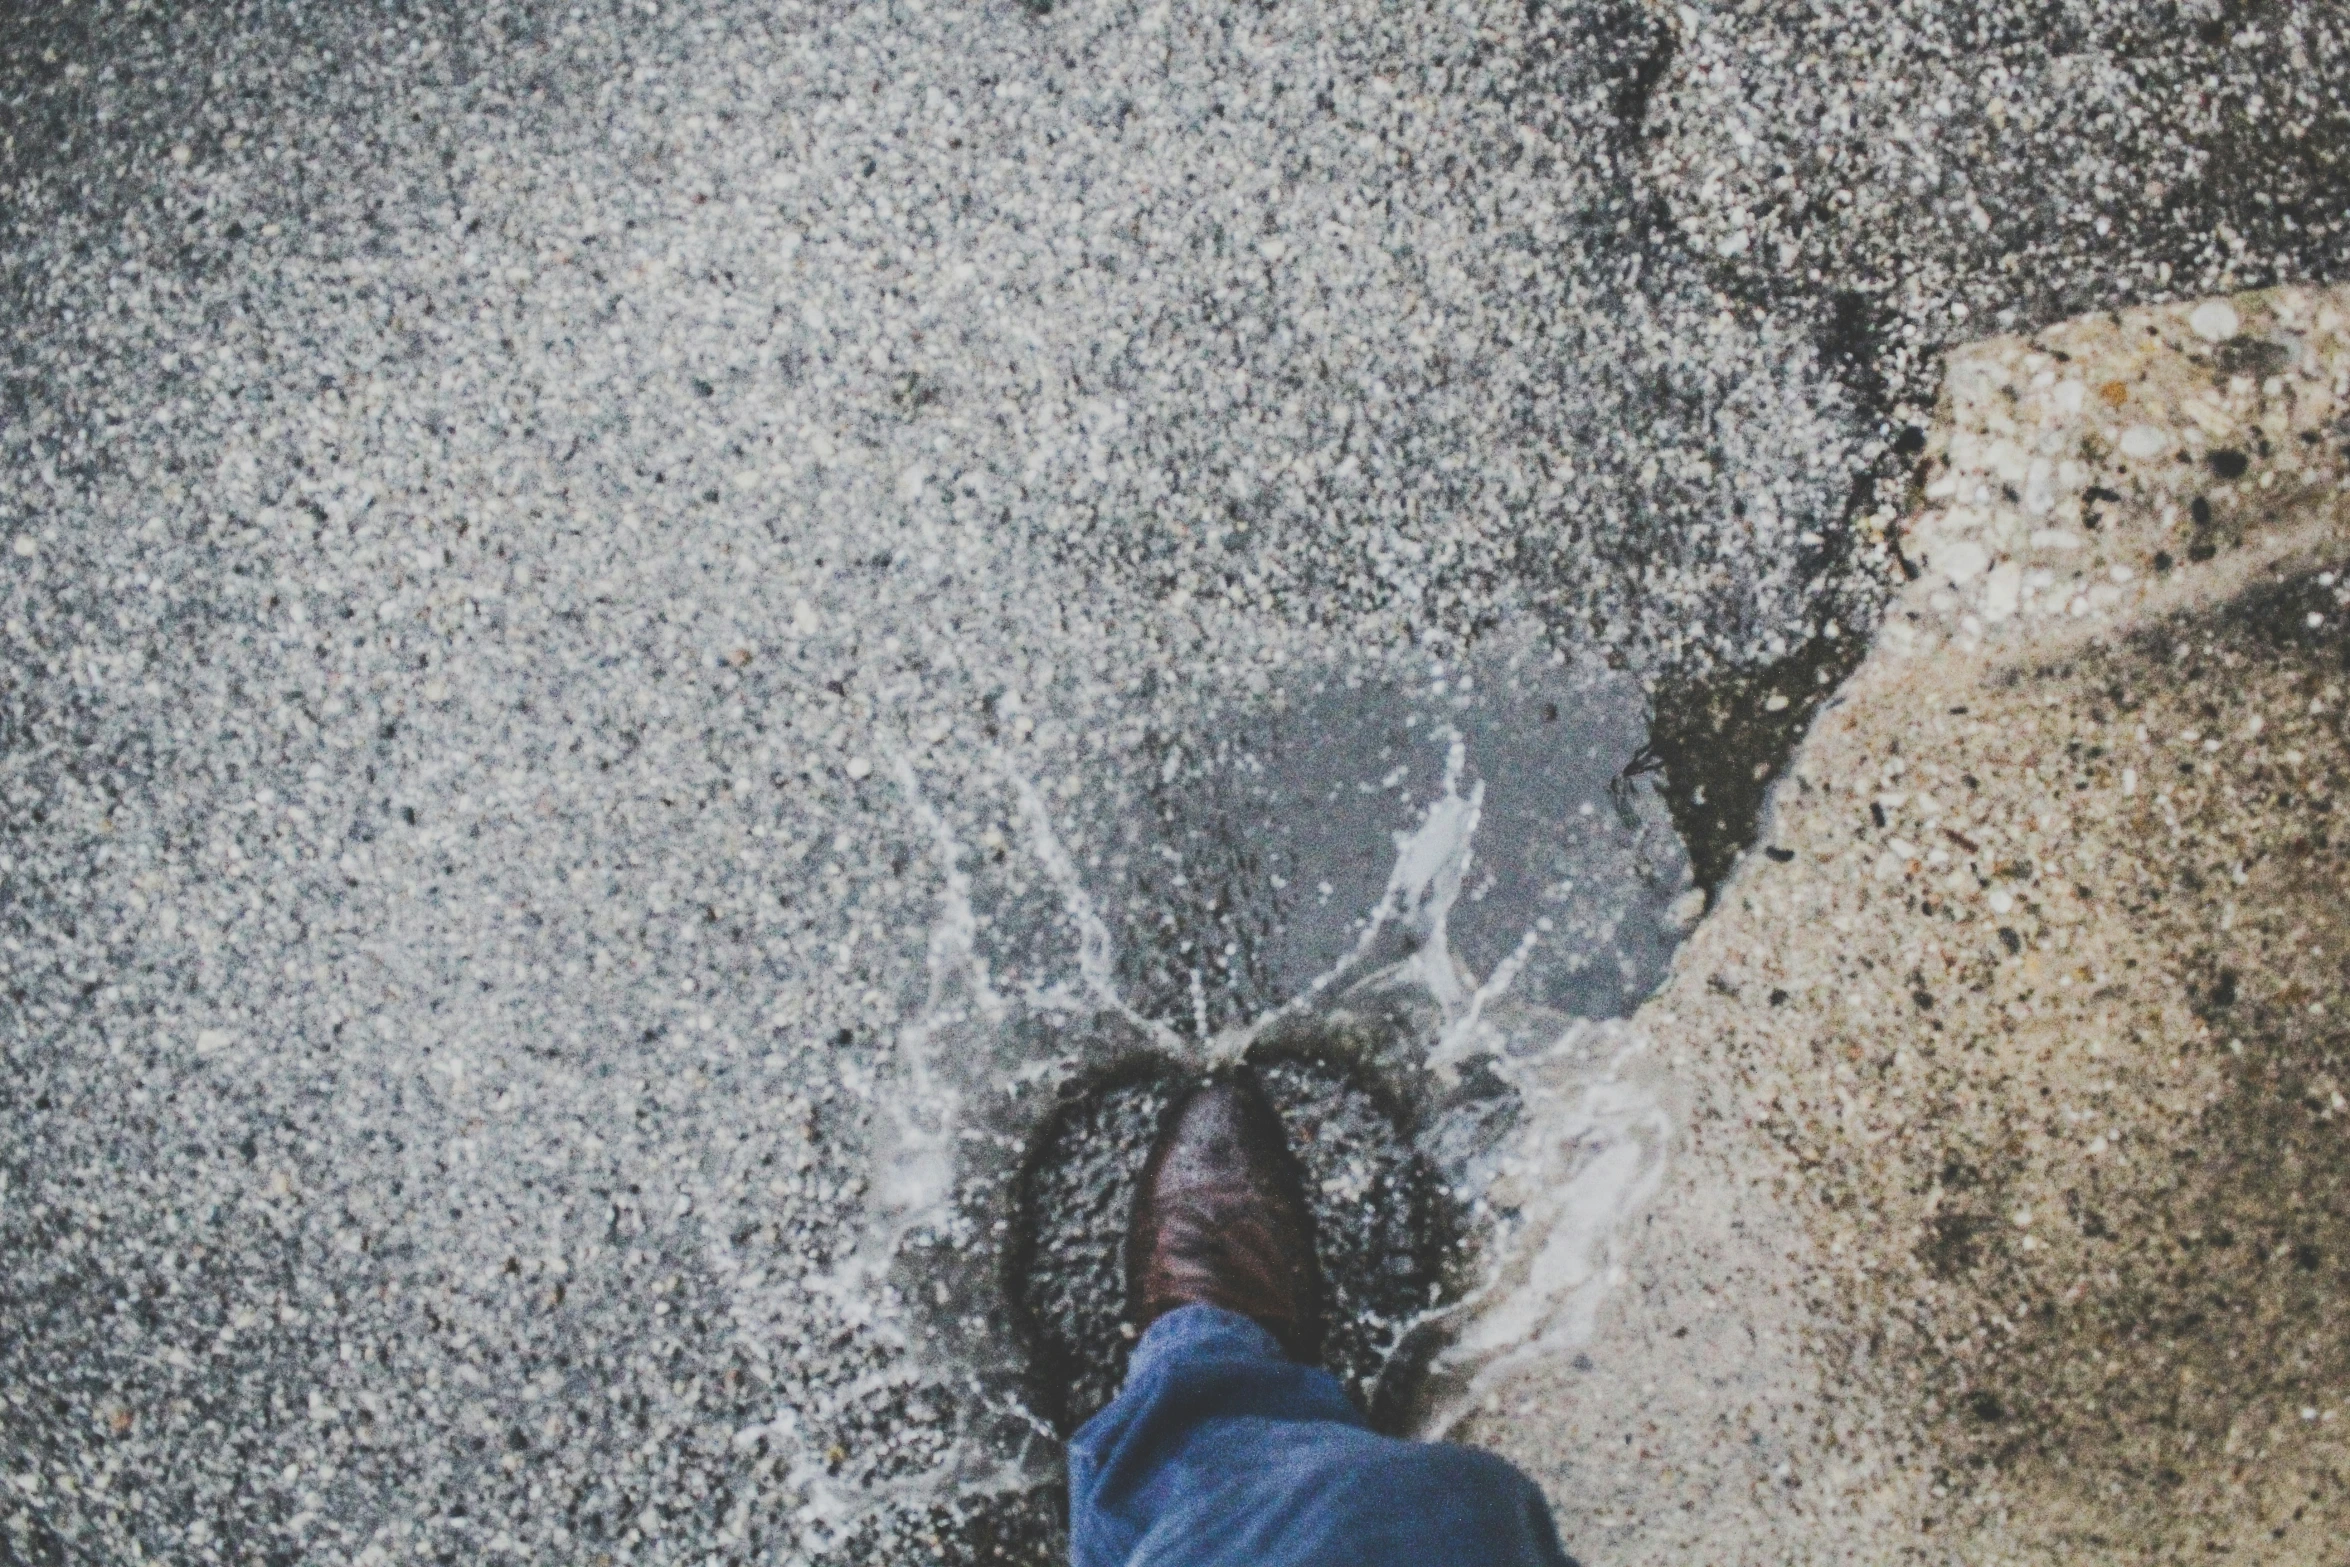 a close up view of someone walking on a wet surface